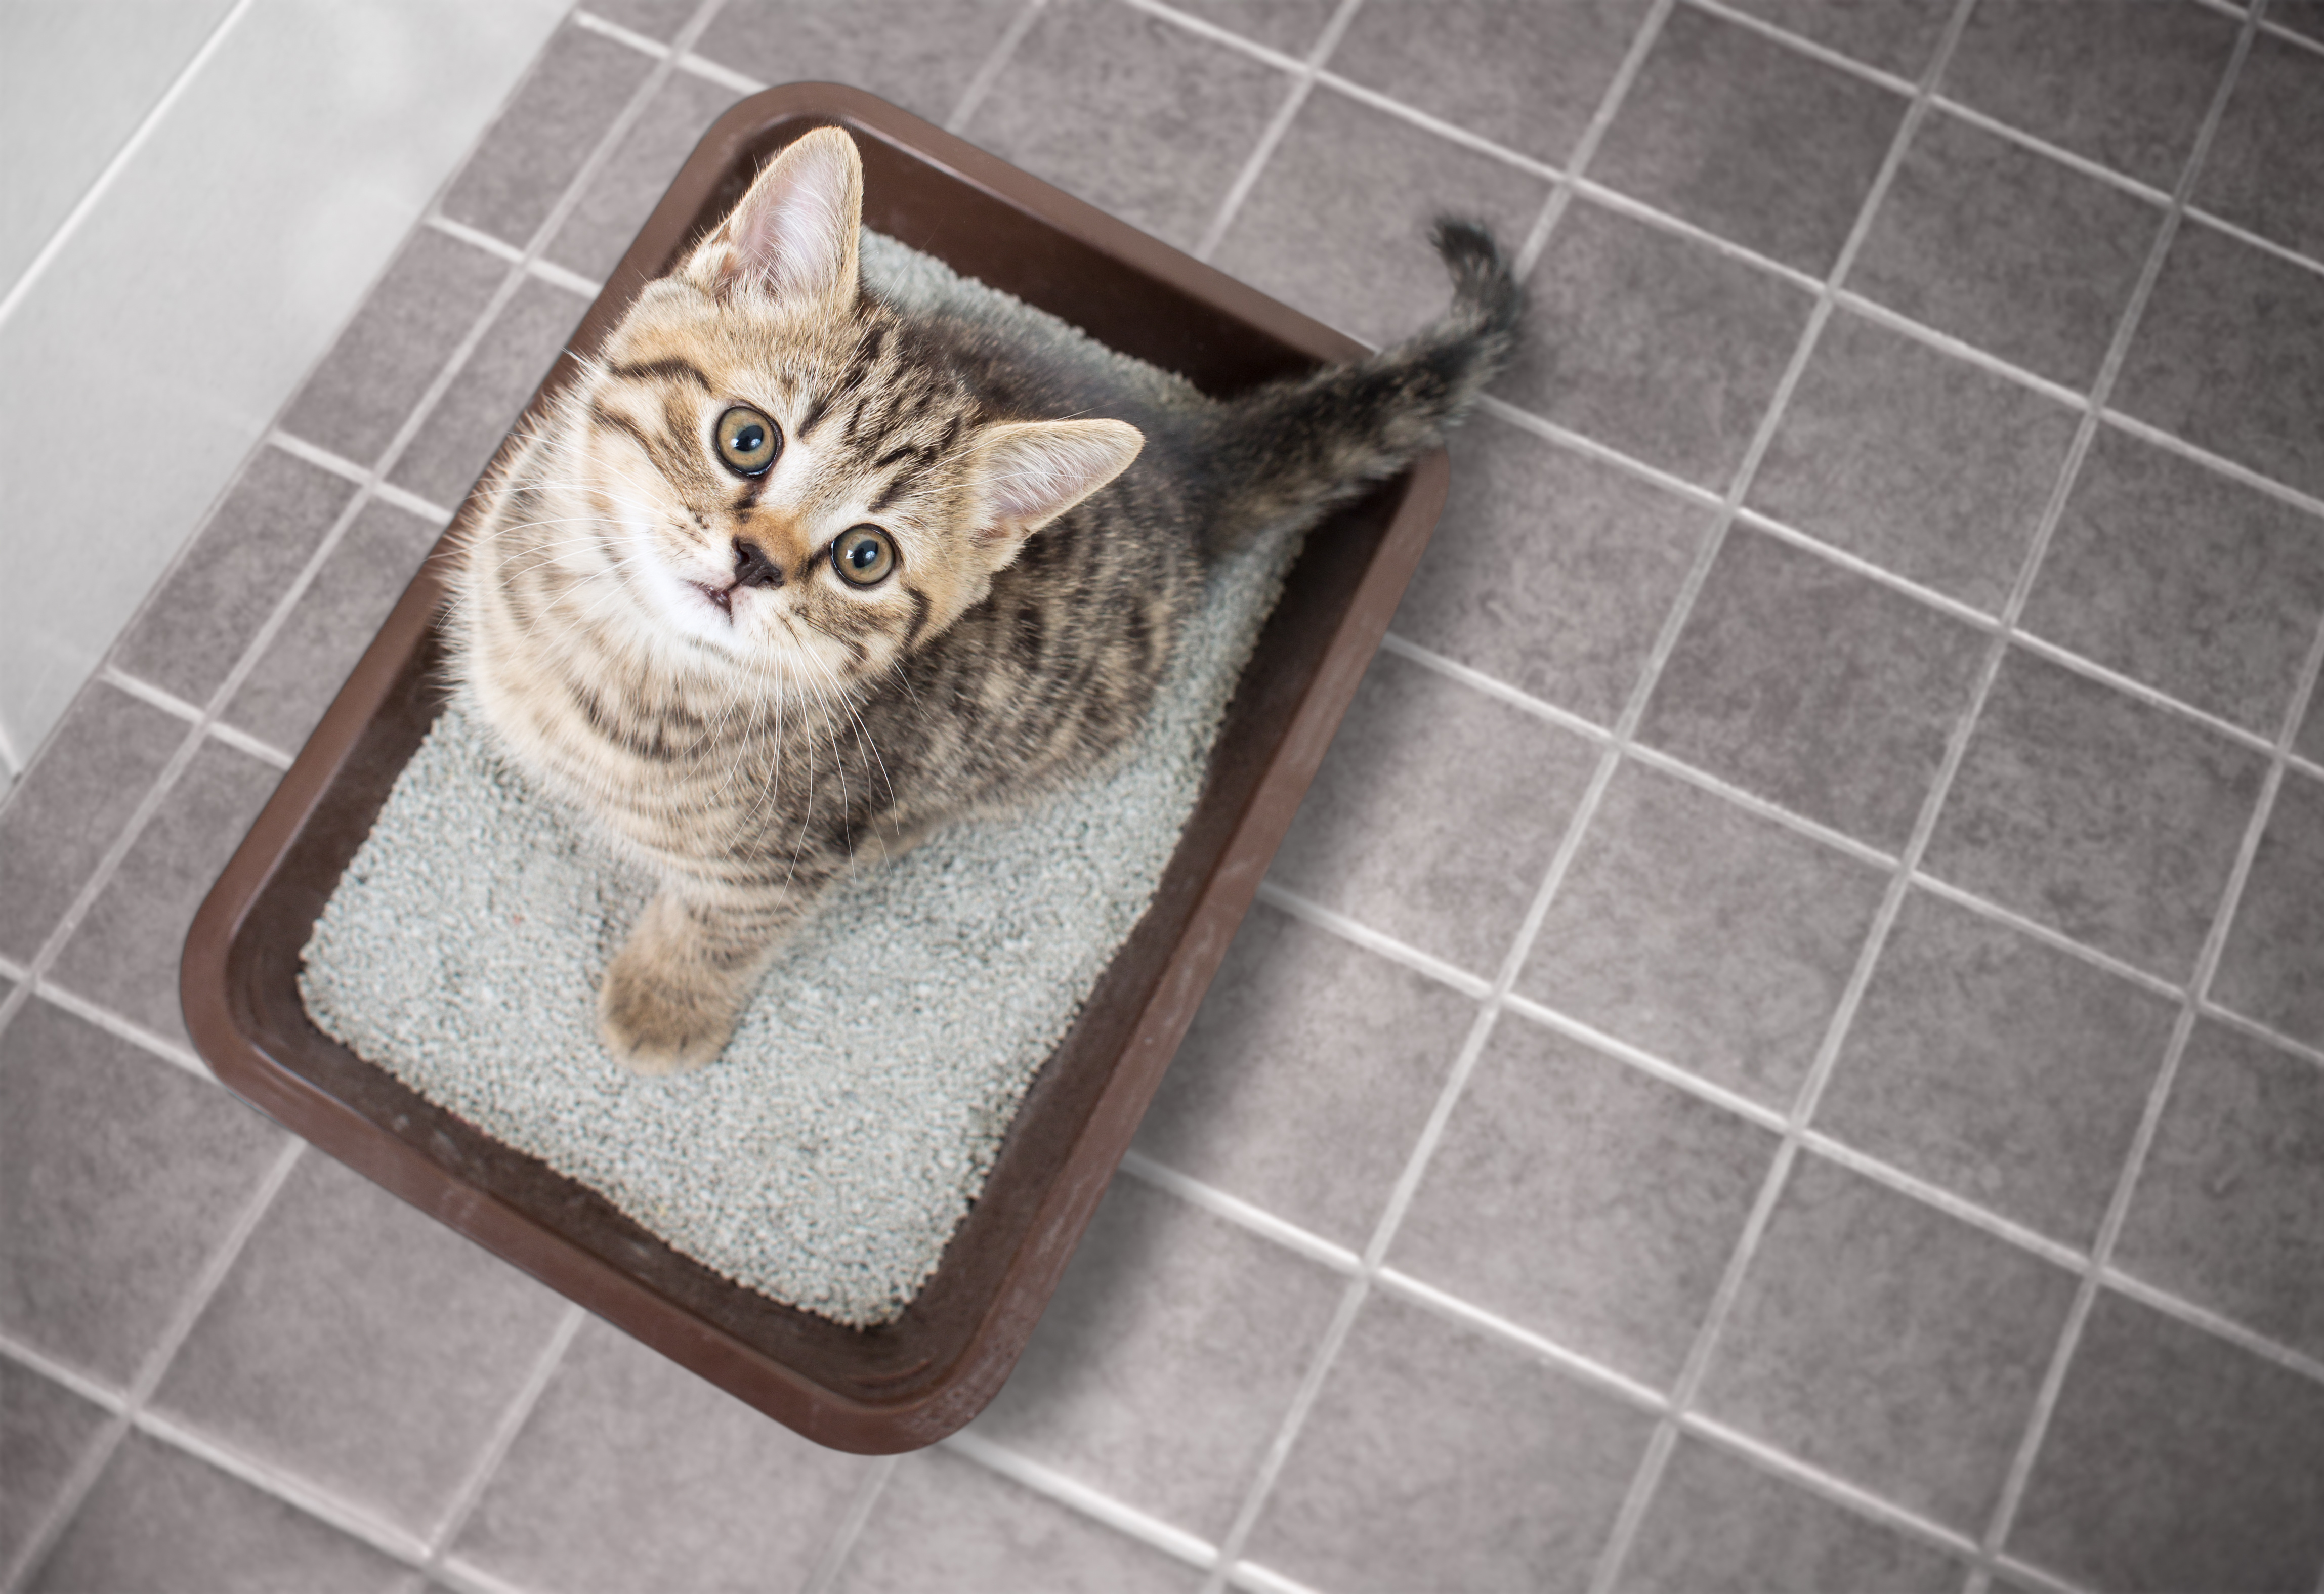 Cat in litter box with sand on bathroom floor